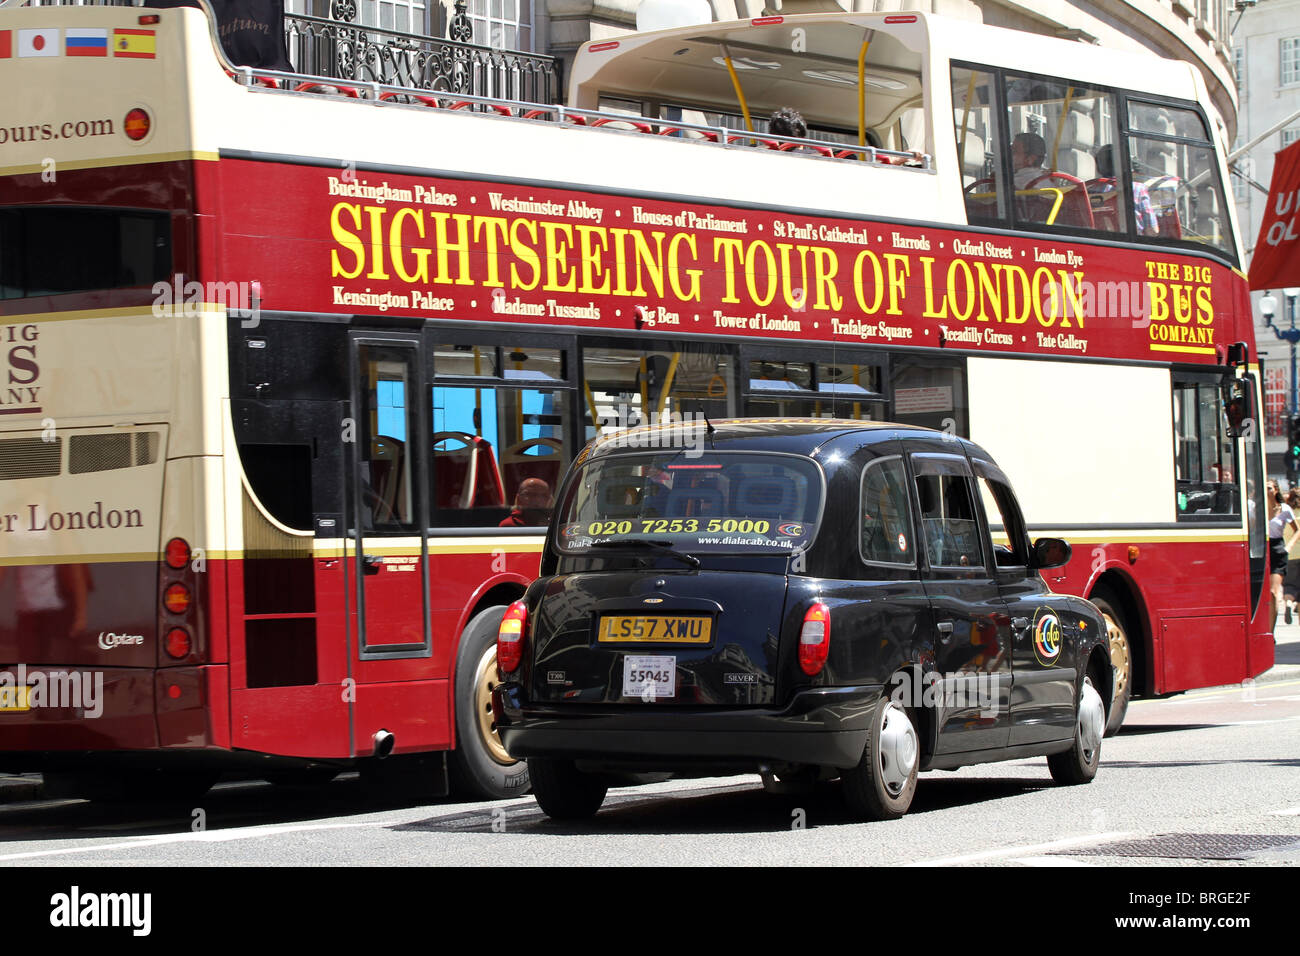 Black London taxi cab and tourist sightseeing tour bus for tourism, London, England Stock Photo